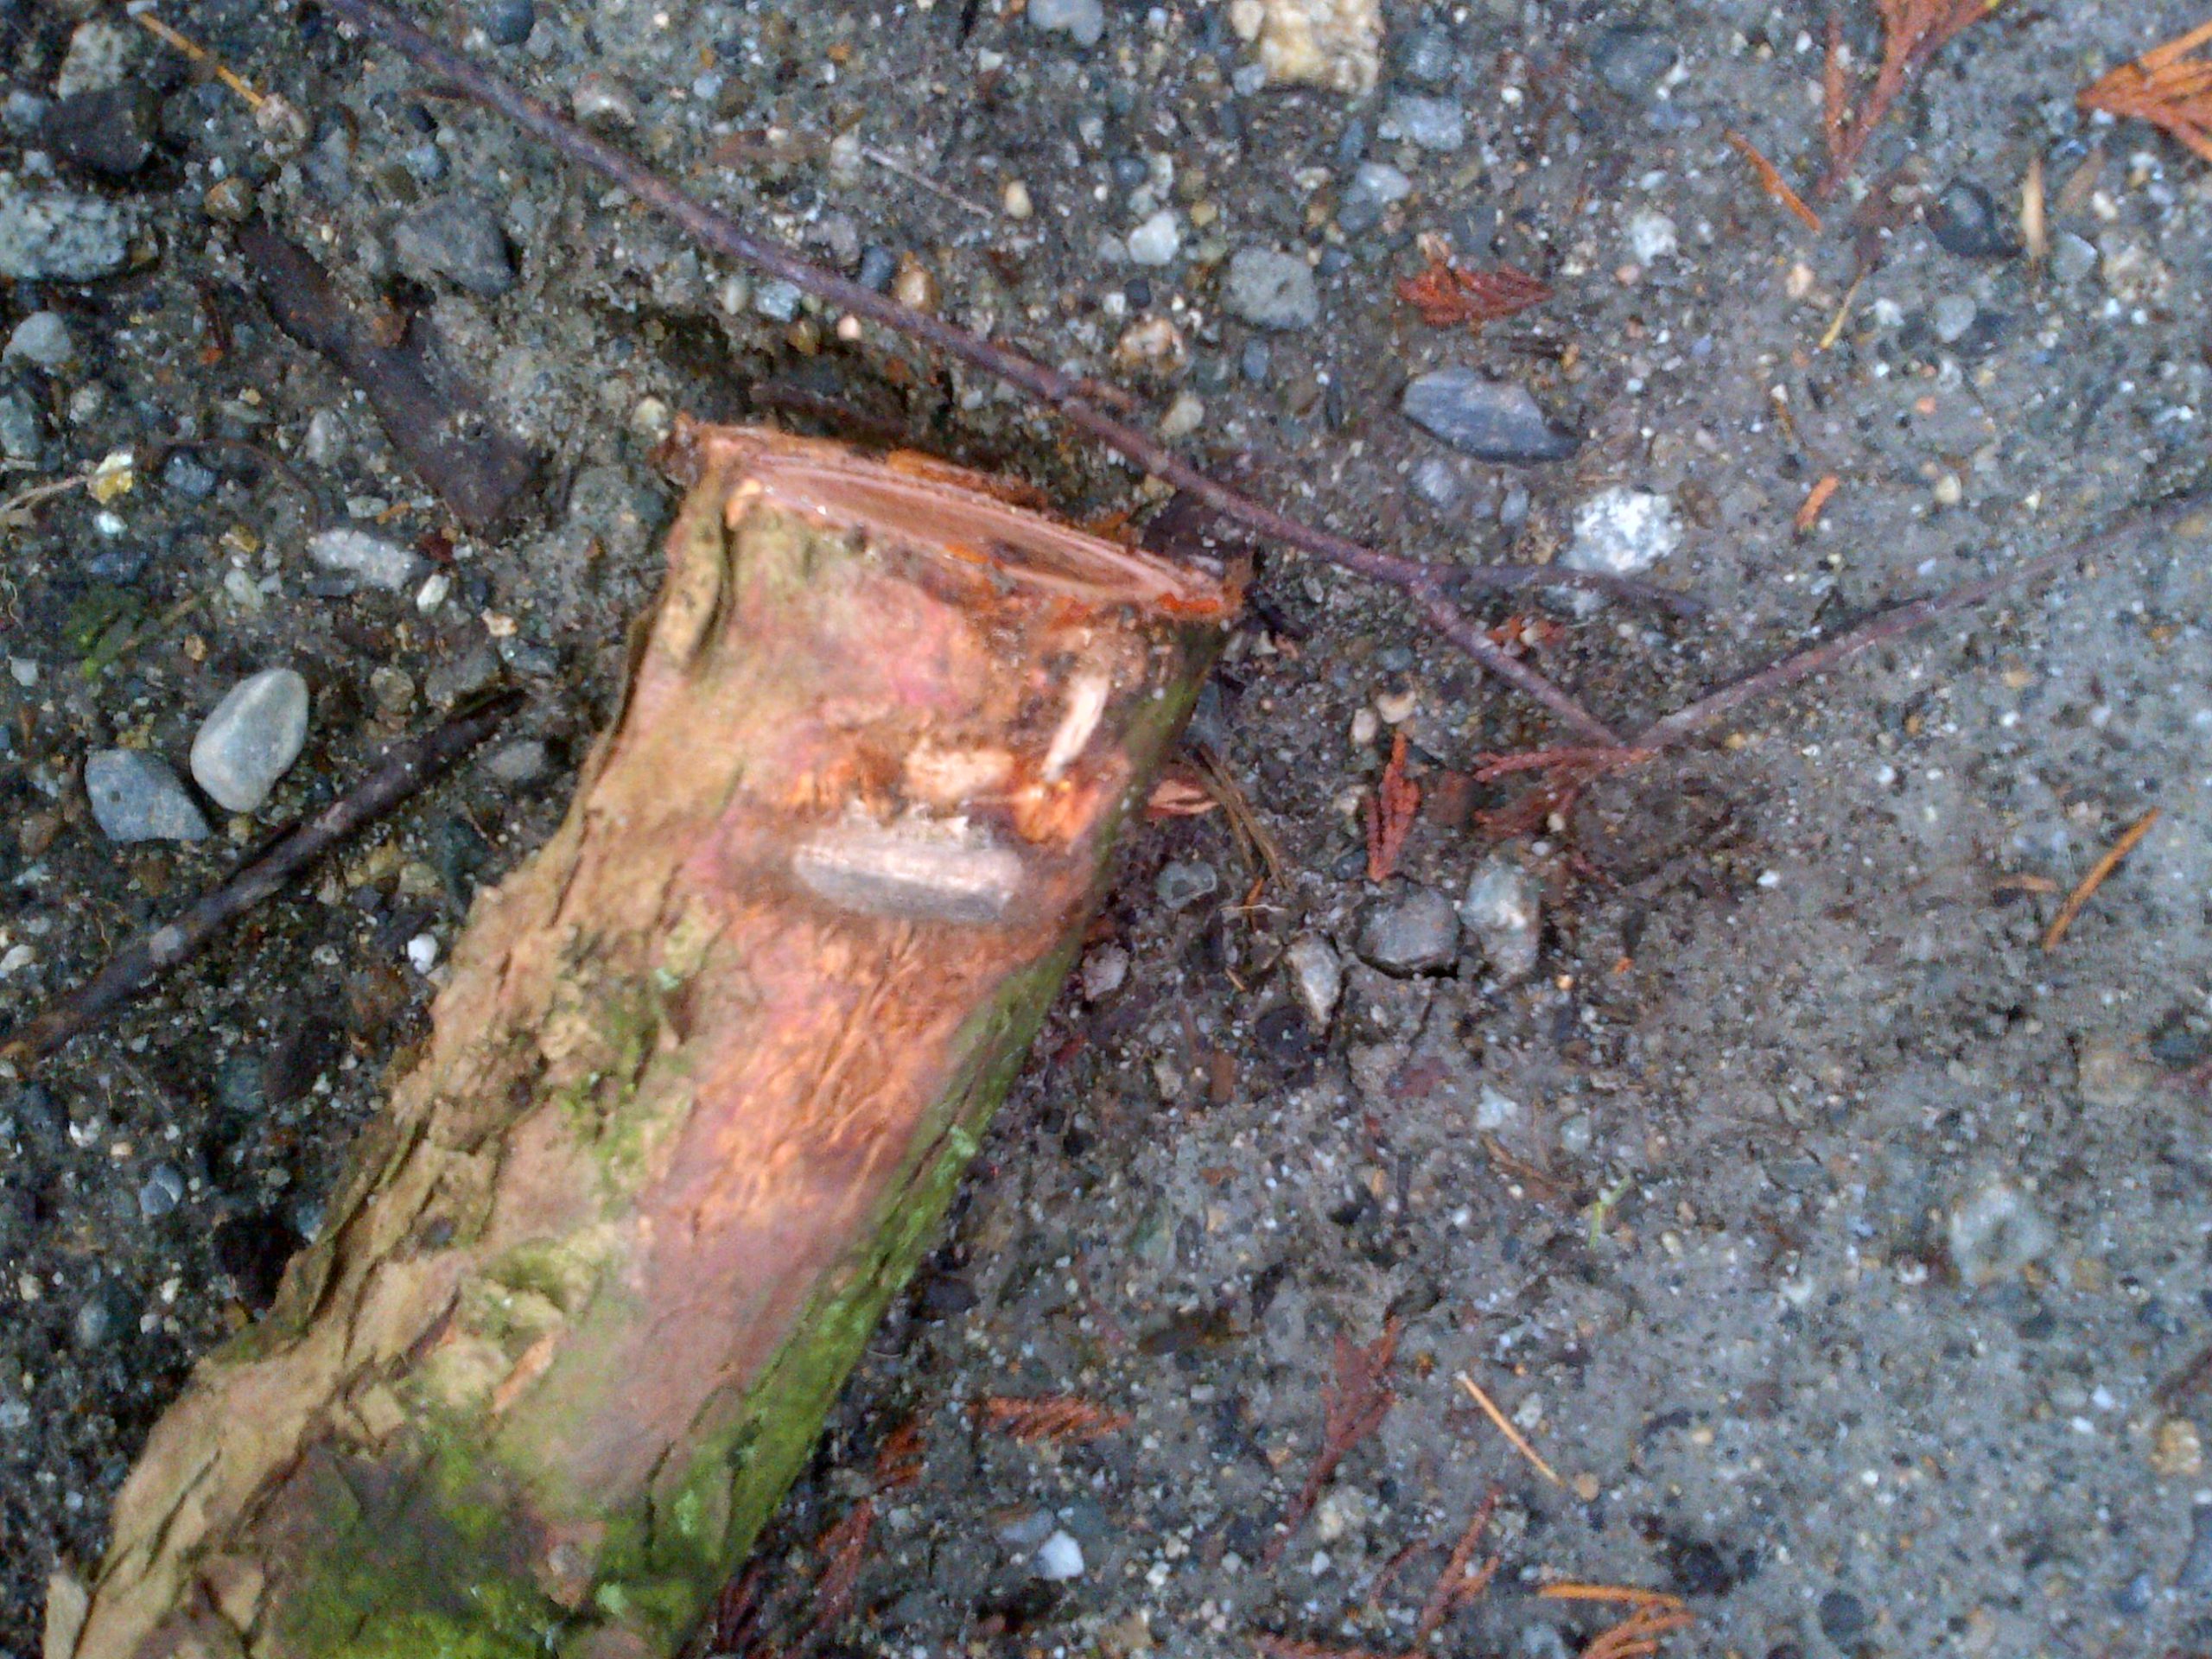 Cable was cutting through branch further resisting movement